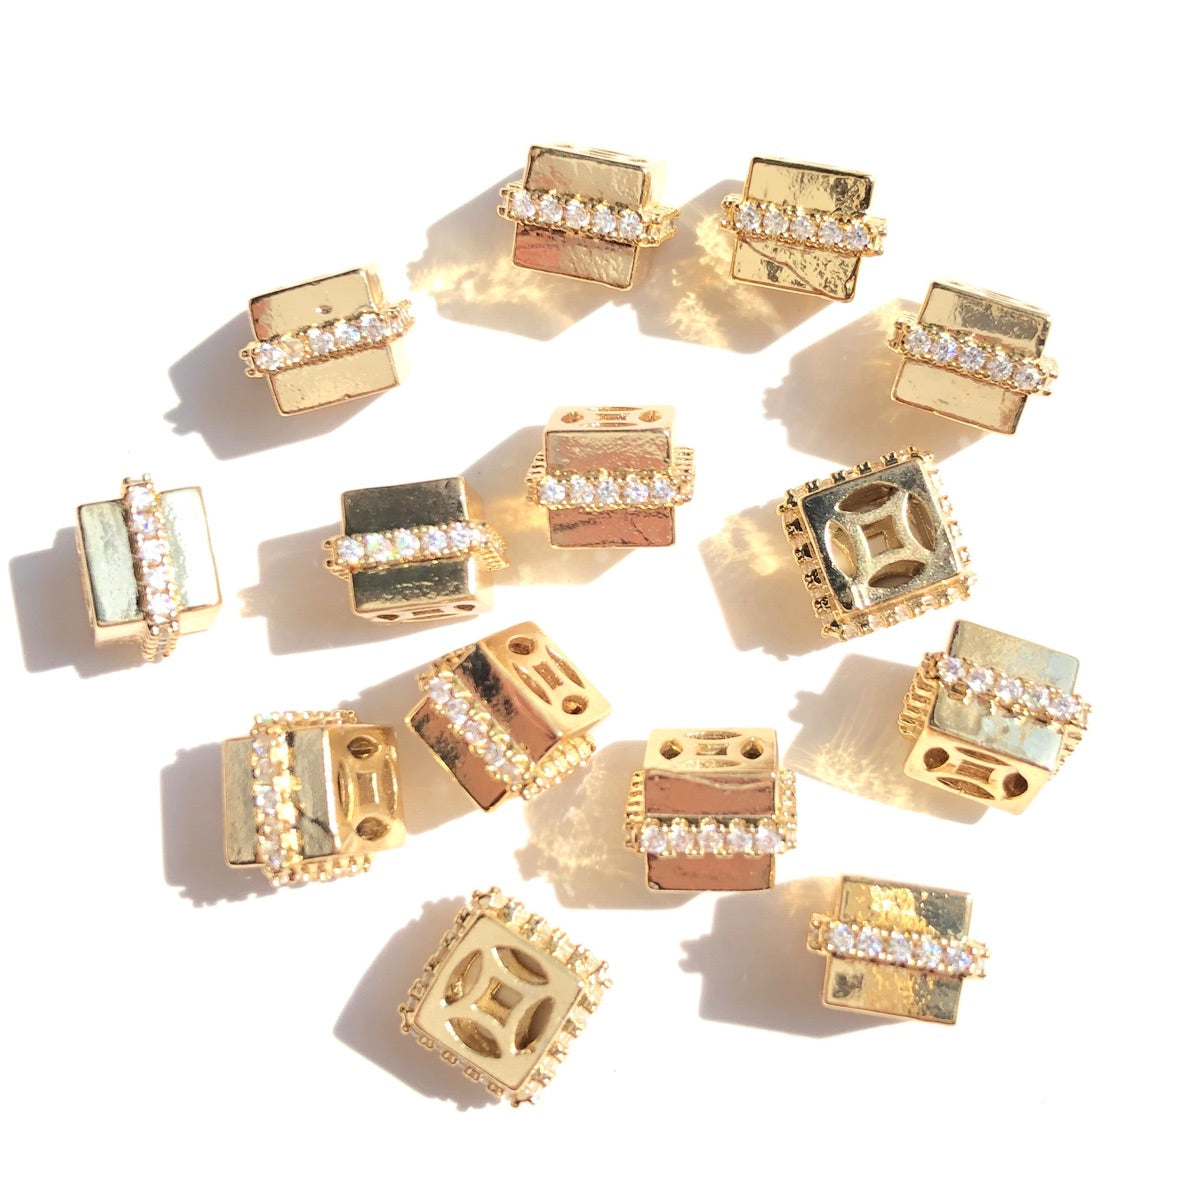 20-50pcs/lot 8.4*6.2mm CZ Pave Square Spacers Gold CZ Paved Spacers New Spacers Arrivals Wholesale Charms Beads Beyond